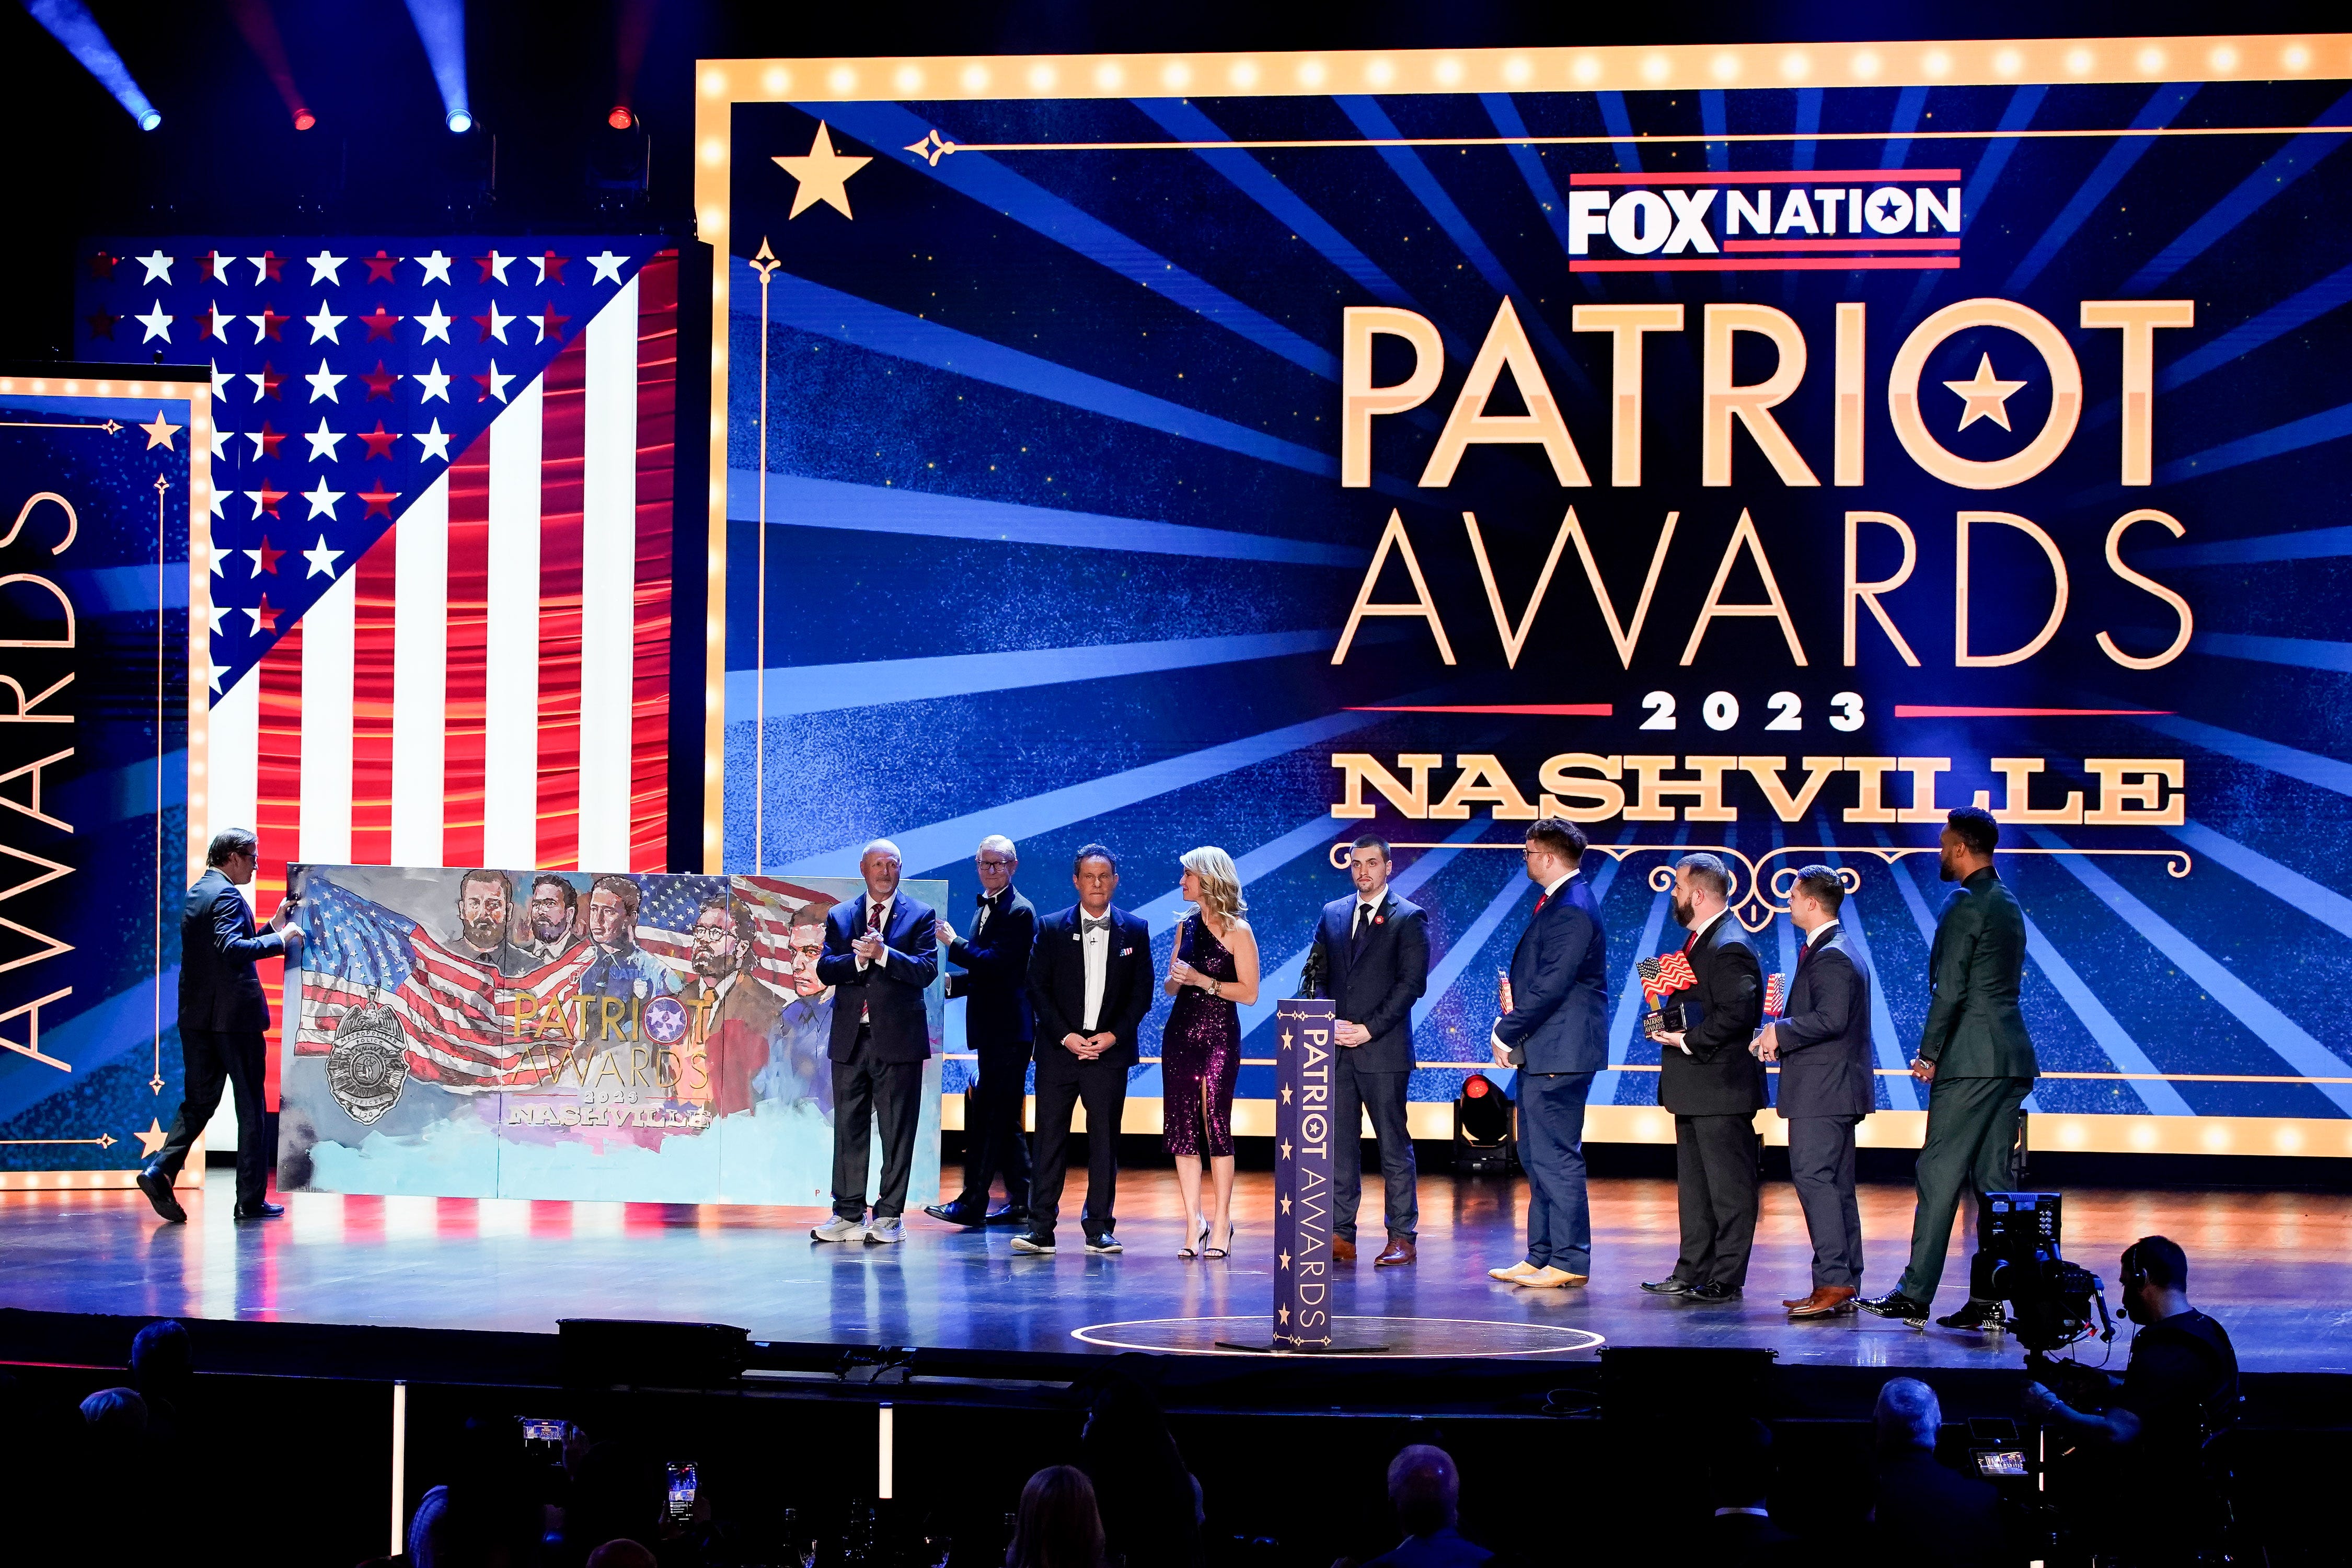 A brightly lit stage with the words "Patriot Awards 2023 Nashville" and an American flag behind a group of people receiving an award.